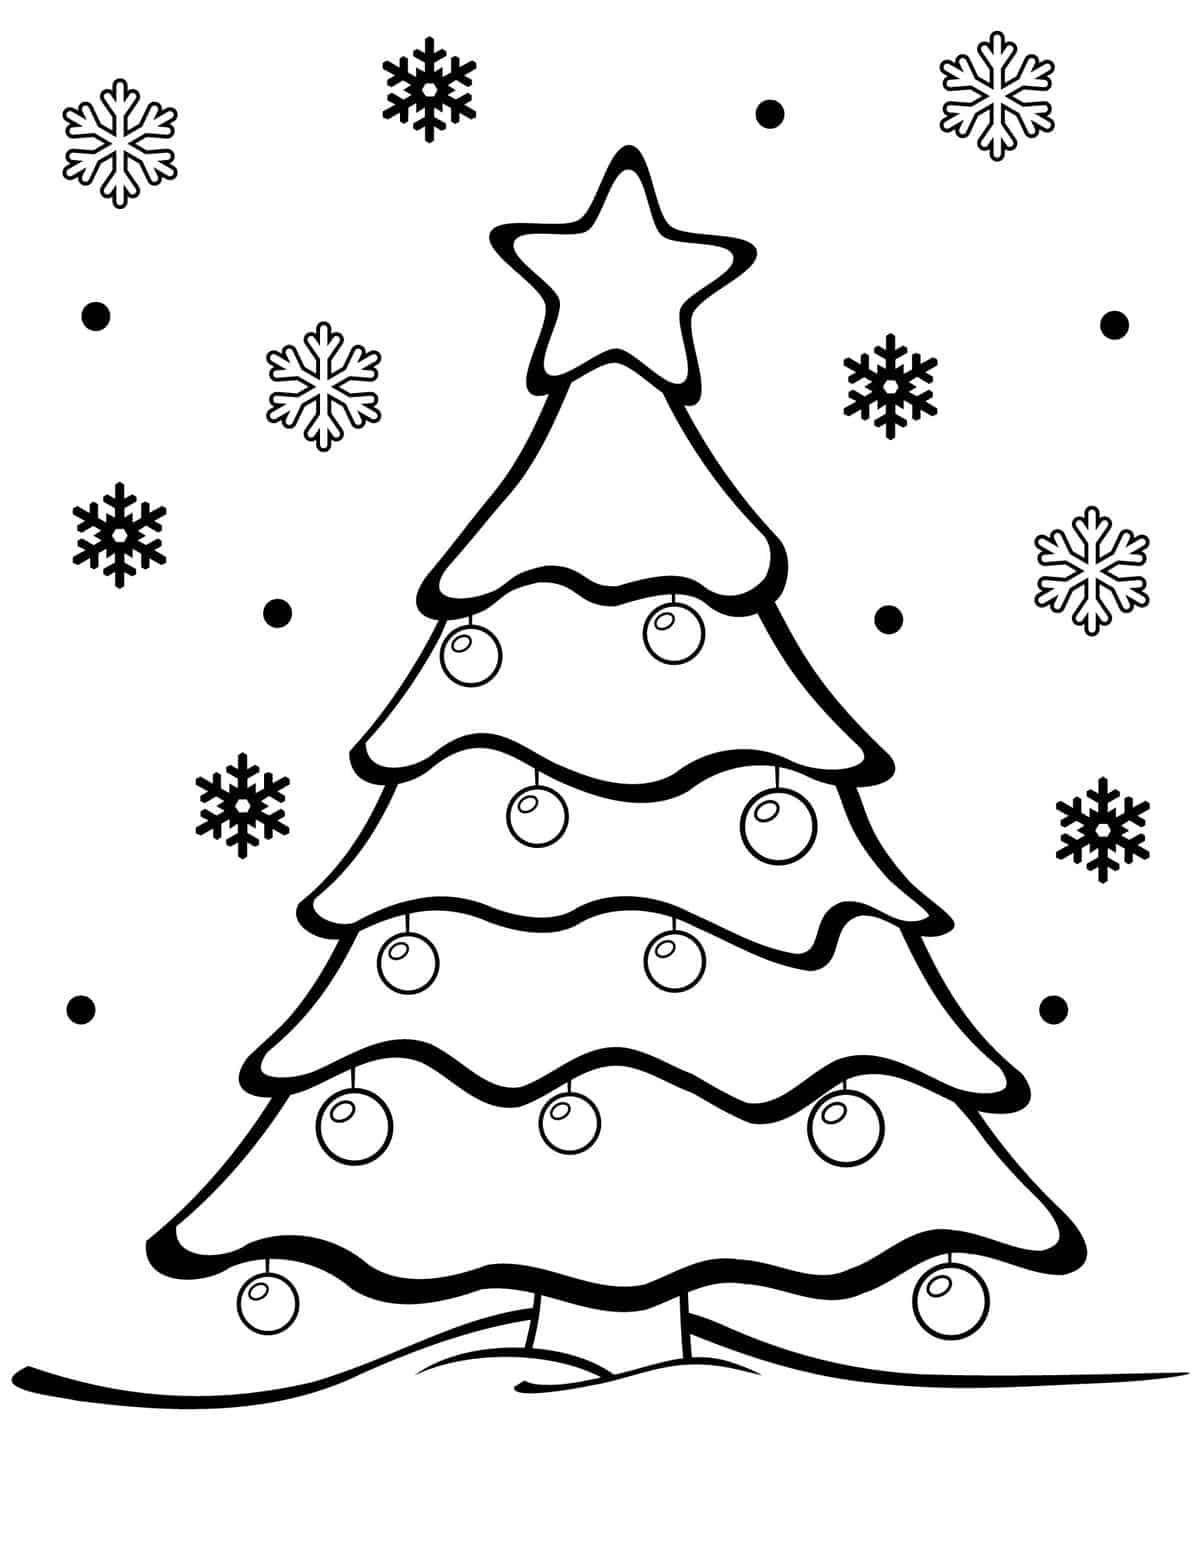 blank-christmas-tree-coloring-pages-for-kids-printable